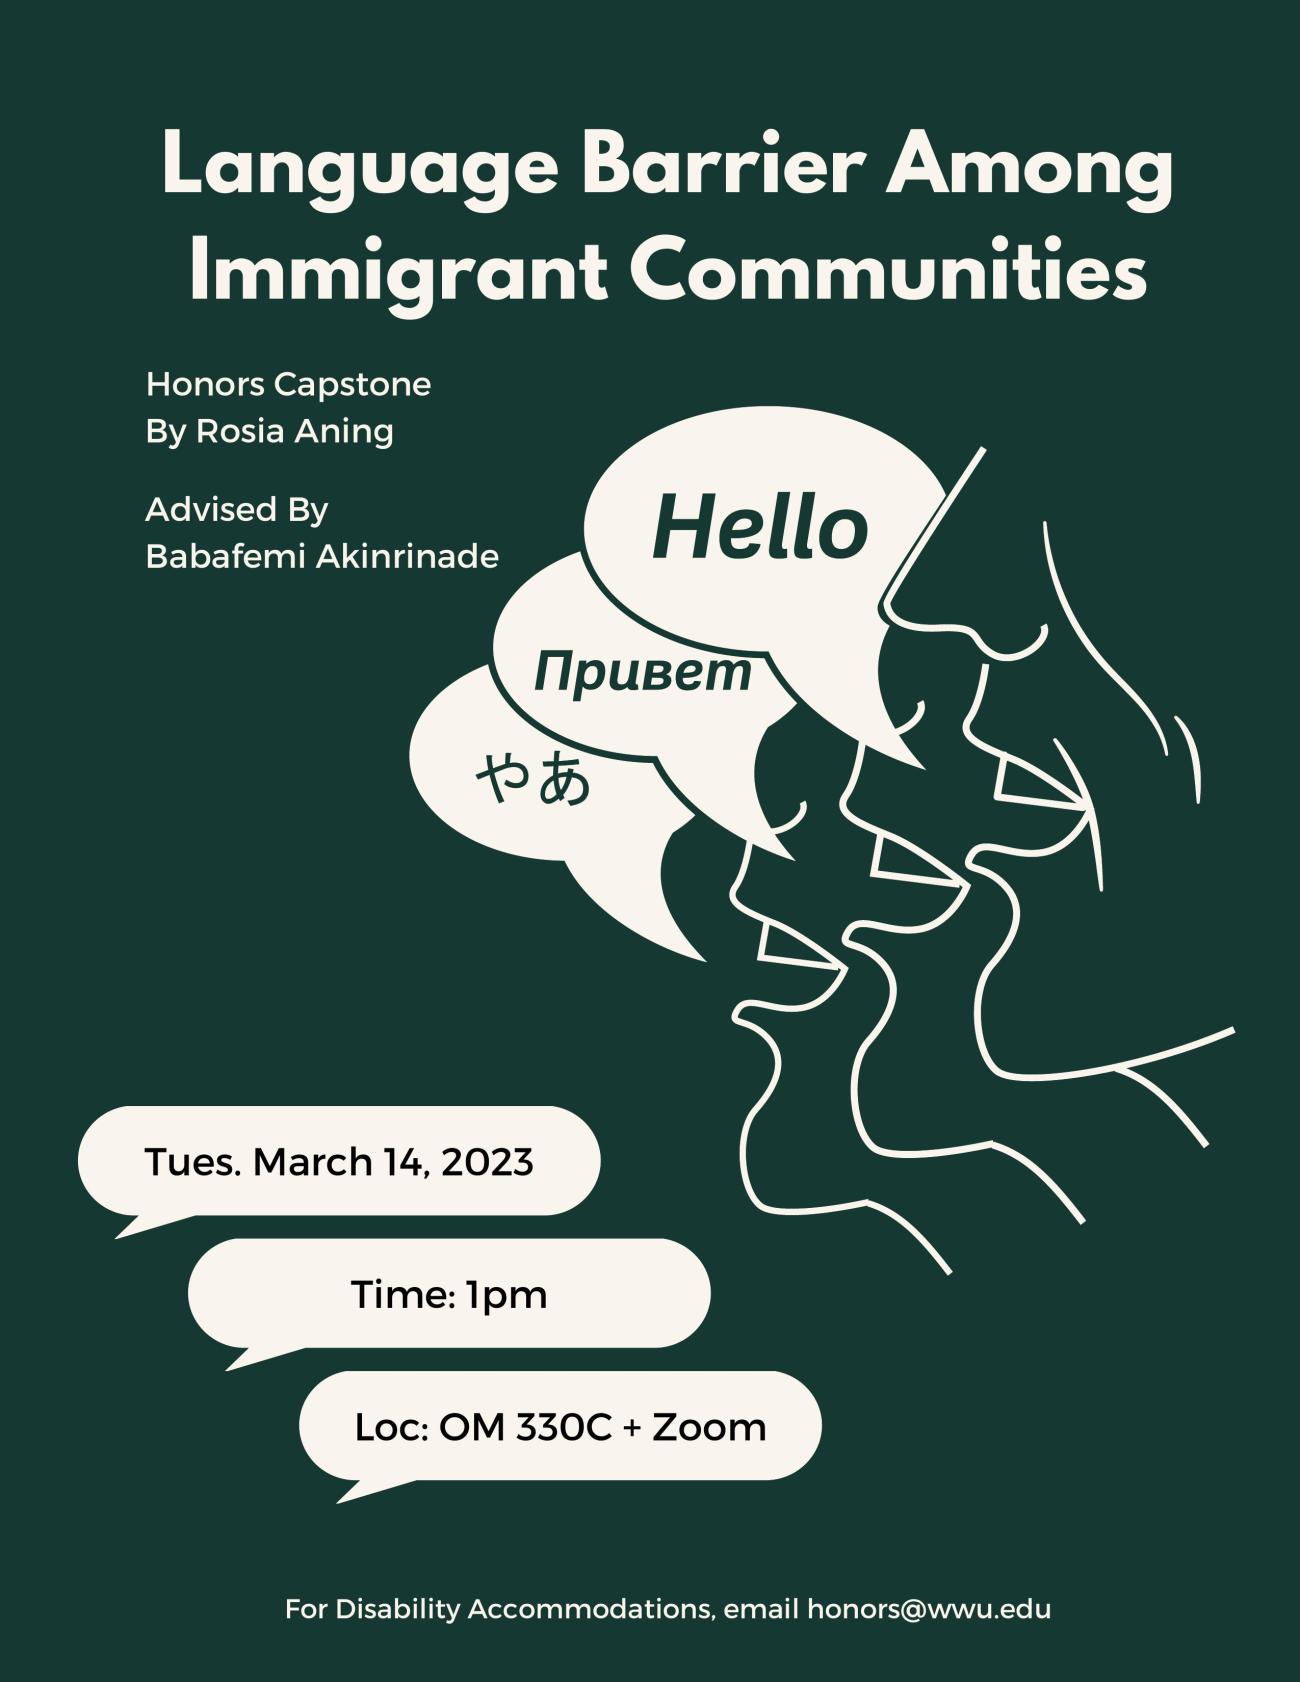 Description of a poster titled "Language Barrier Among Immigrant Communities" for the Honors Capstone project by Rosia Aning, advised by Babafemi Akinrinade. The poster provides details about the project including the date, time, and location of the presentation, which is on Tuesday, March 14th, 2023 at 1 pm in OM 330C and via Zoom. The poster also includes contact information for disability accommodations, which can be requested by emailing honors@wwu.edu